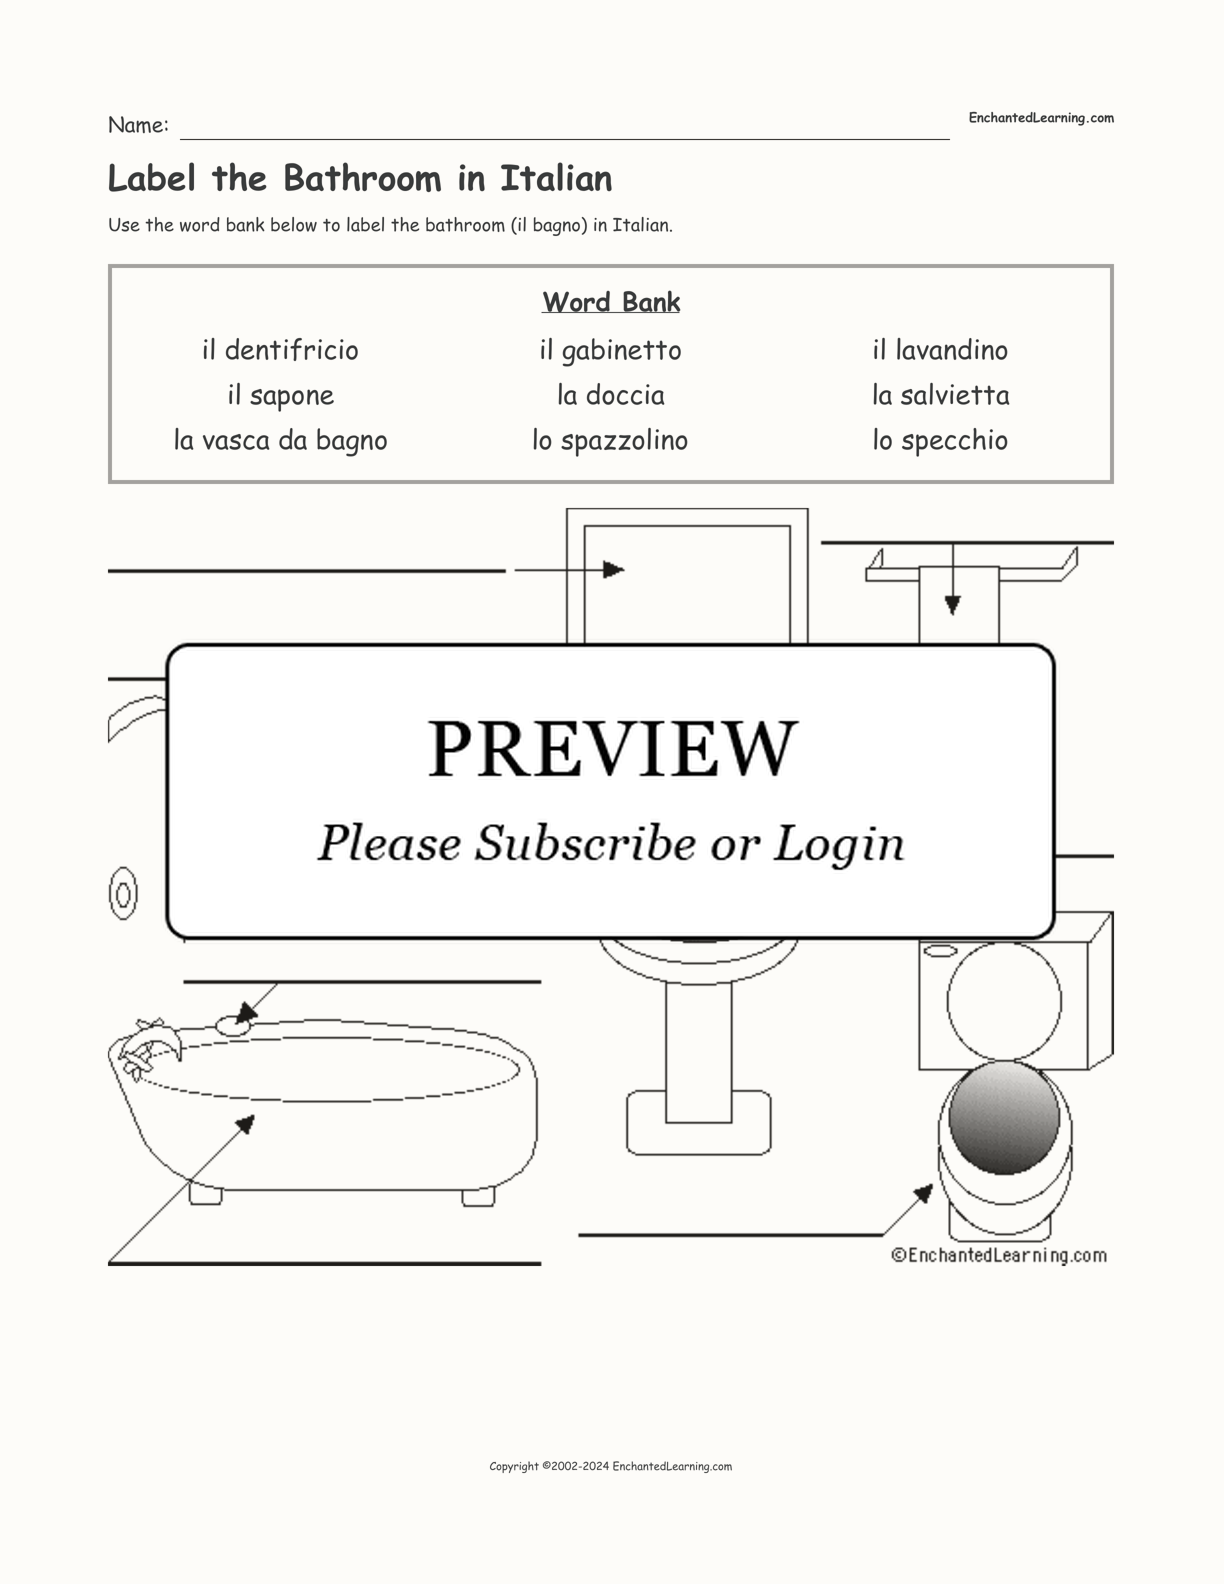 Label the Bathroom in Italian interactive worksheet page 1